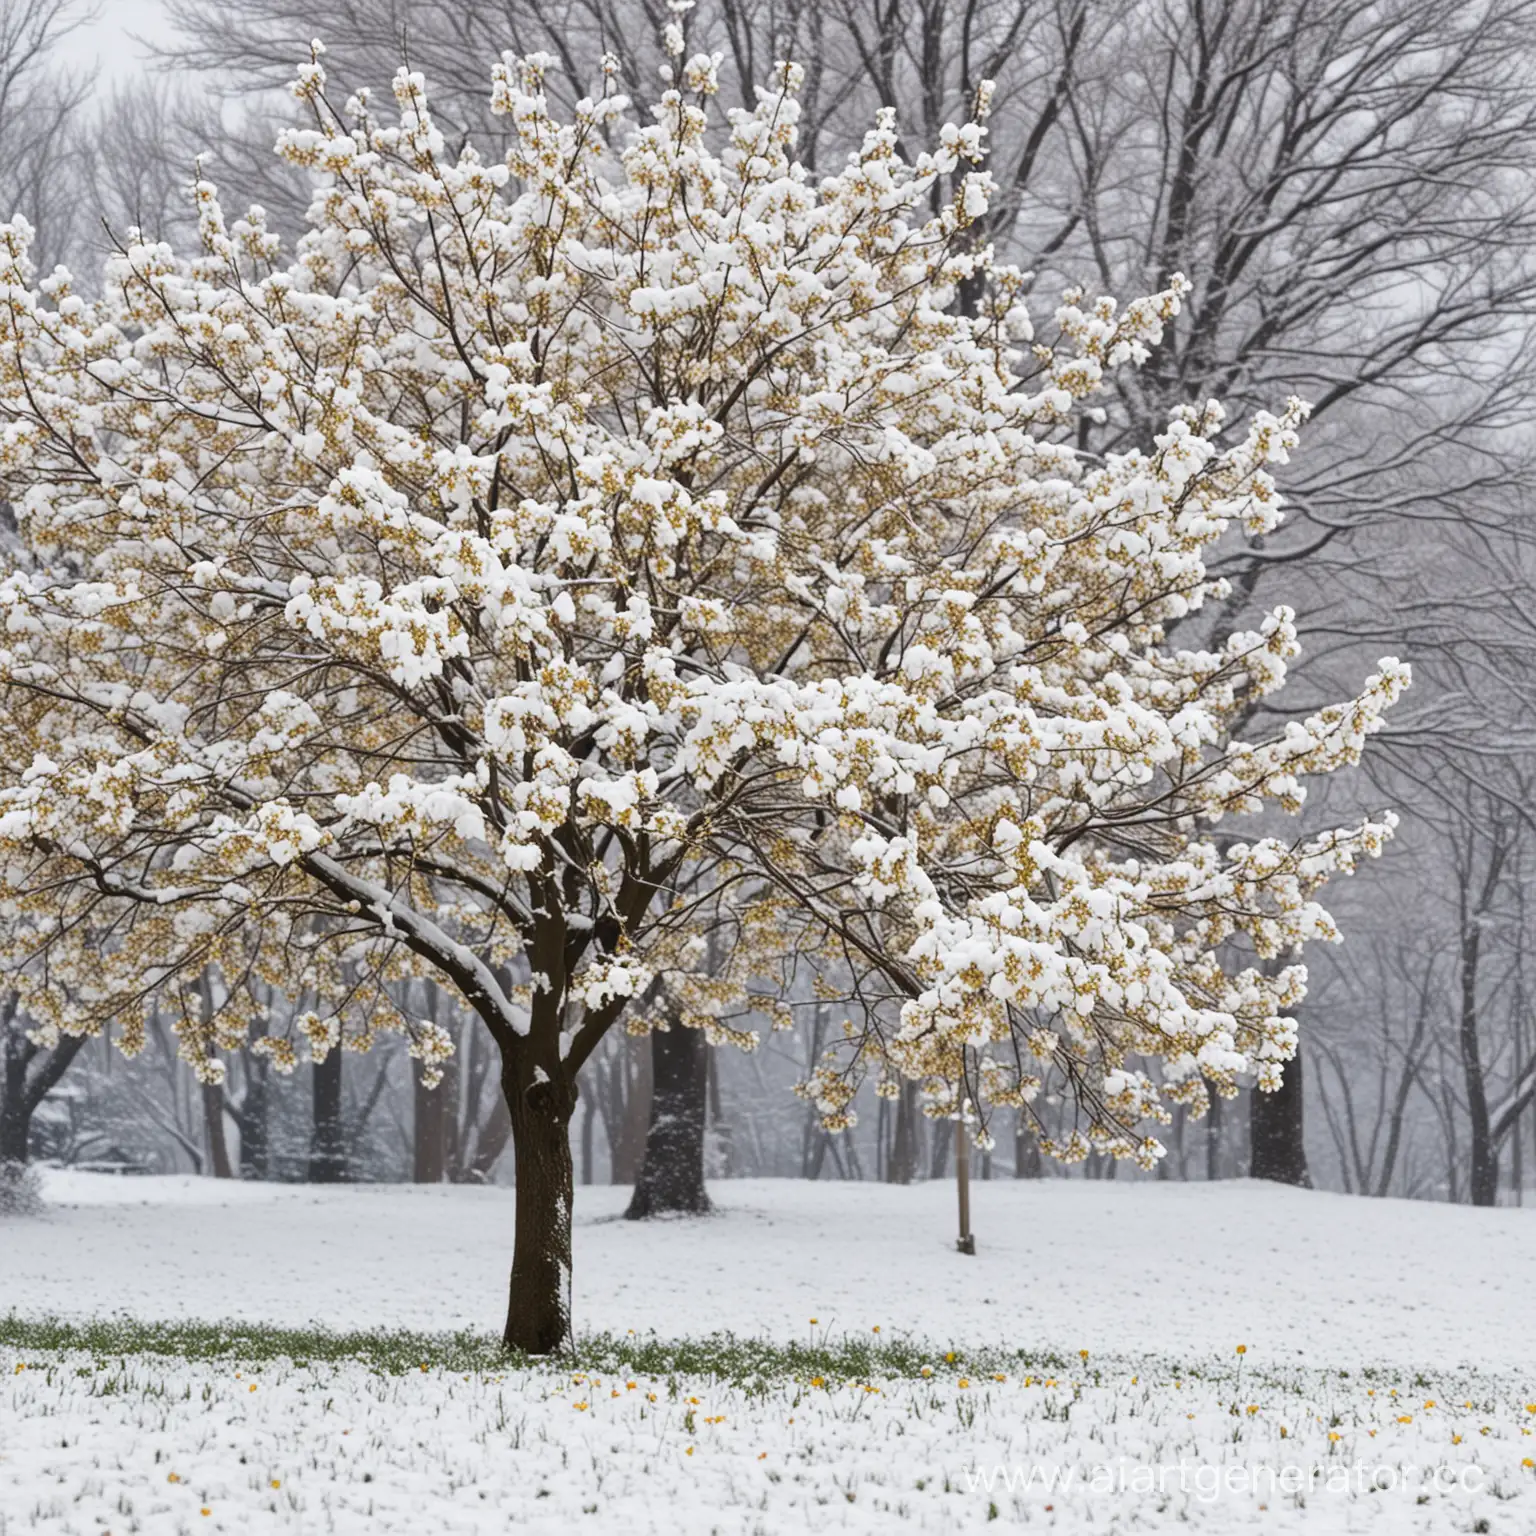 Blooming-Spring-Flowers-Surround-SnowCovered-Tree